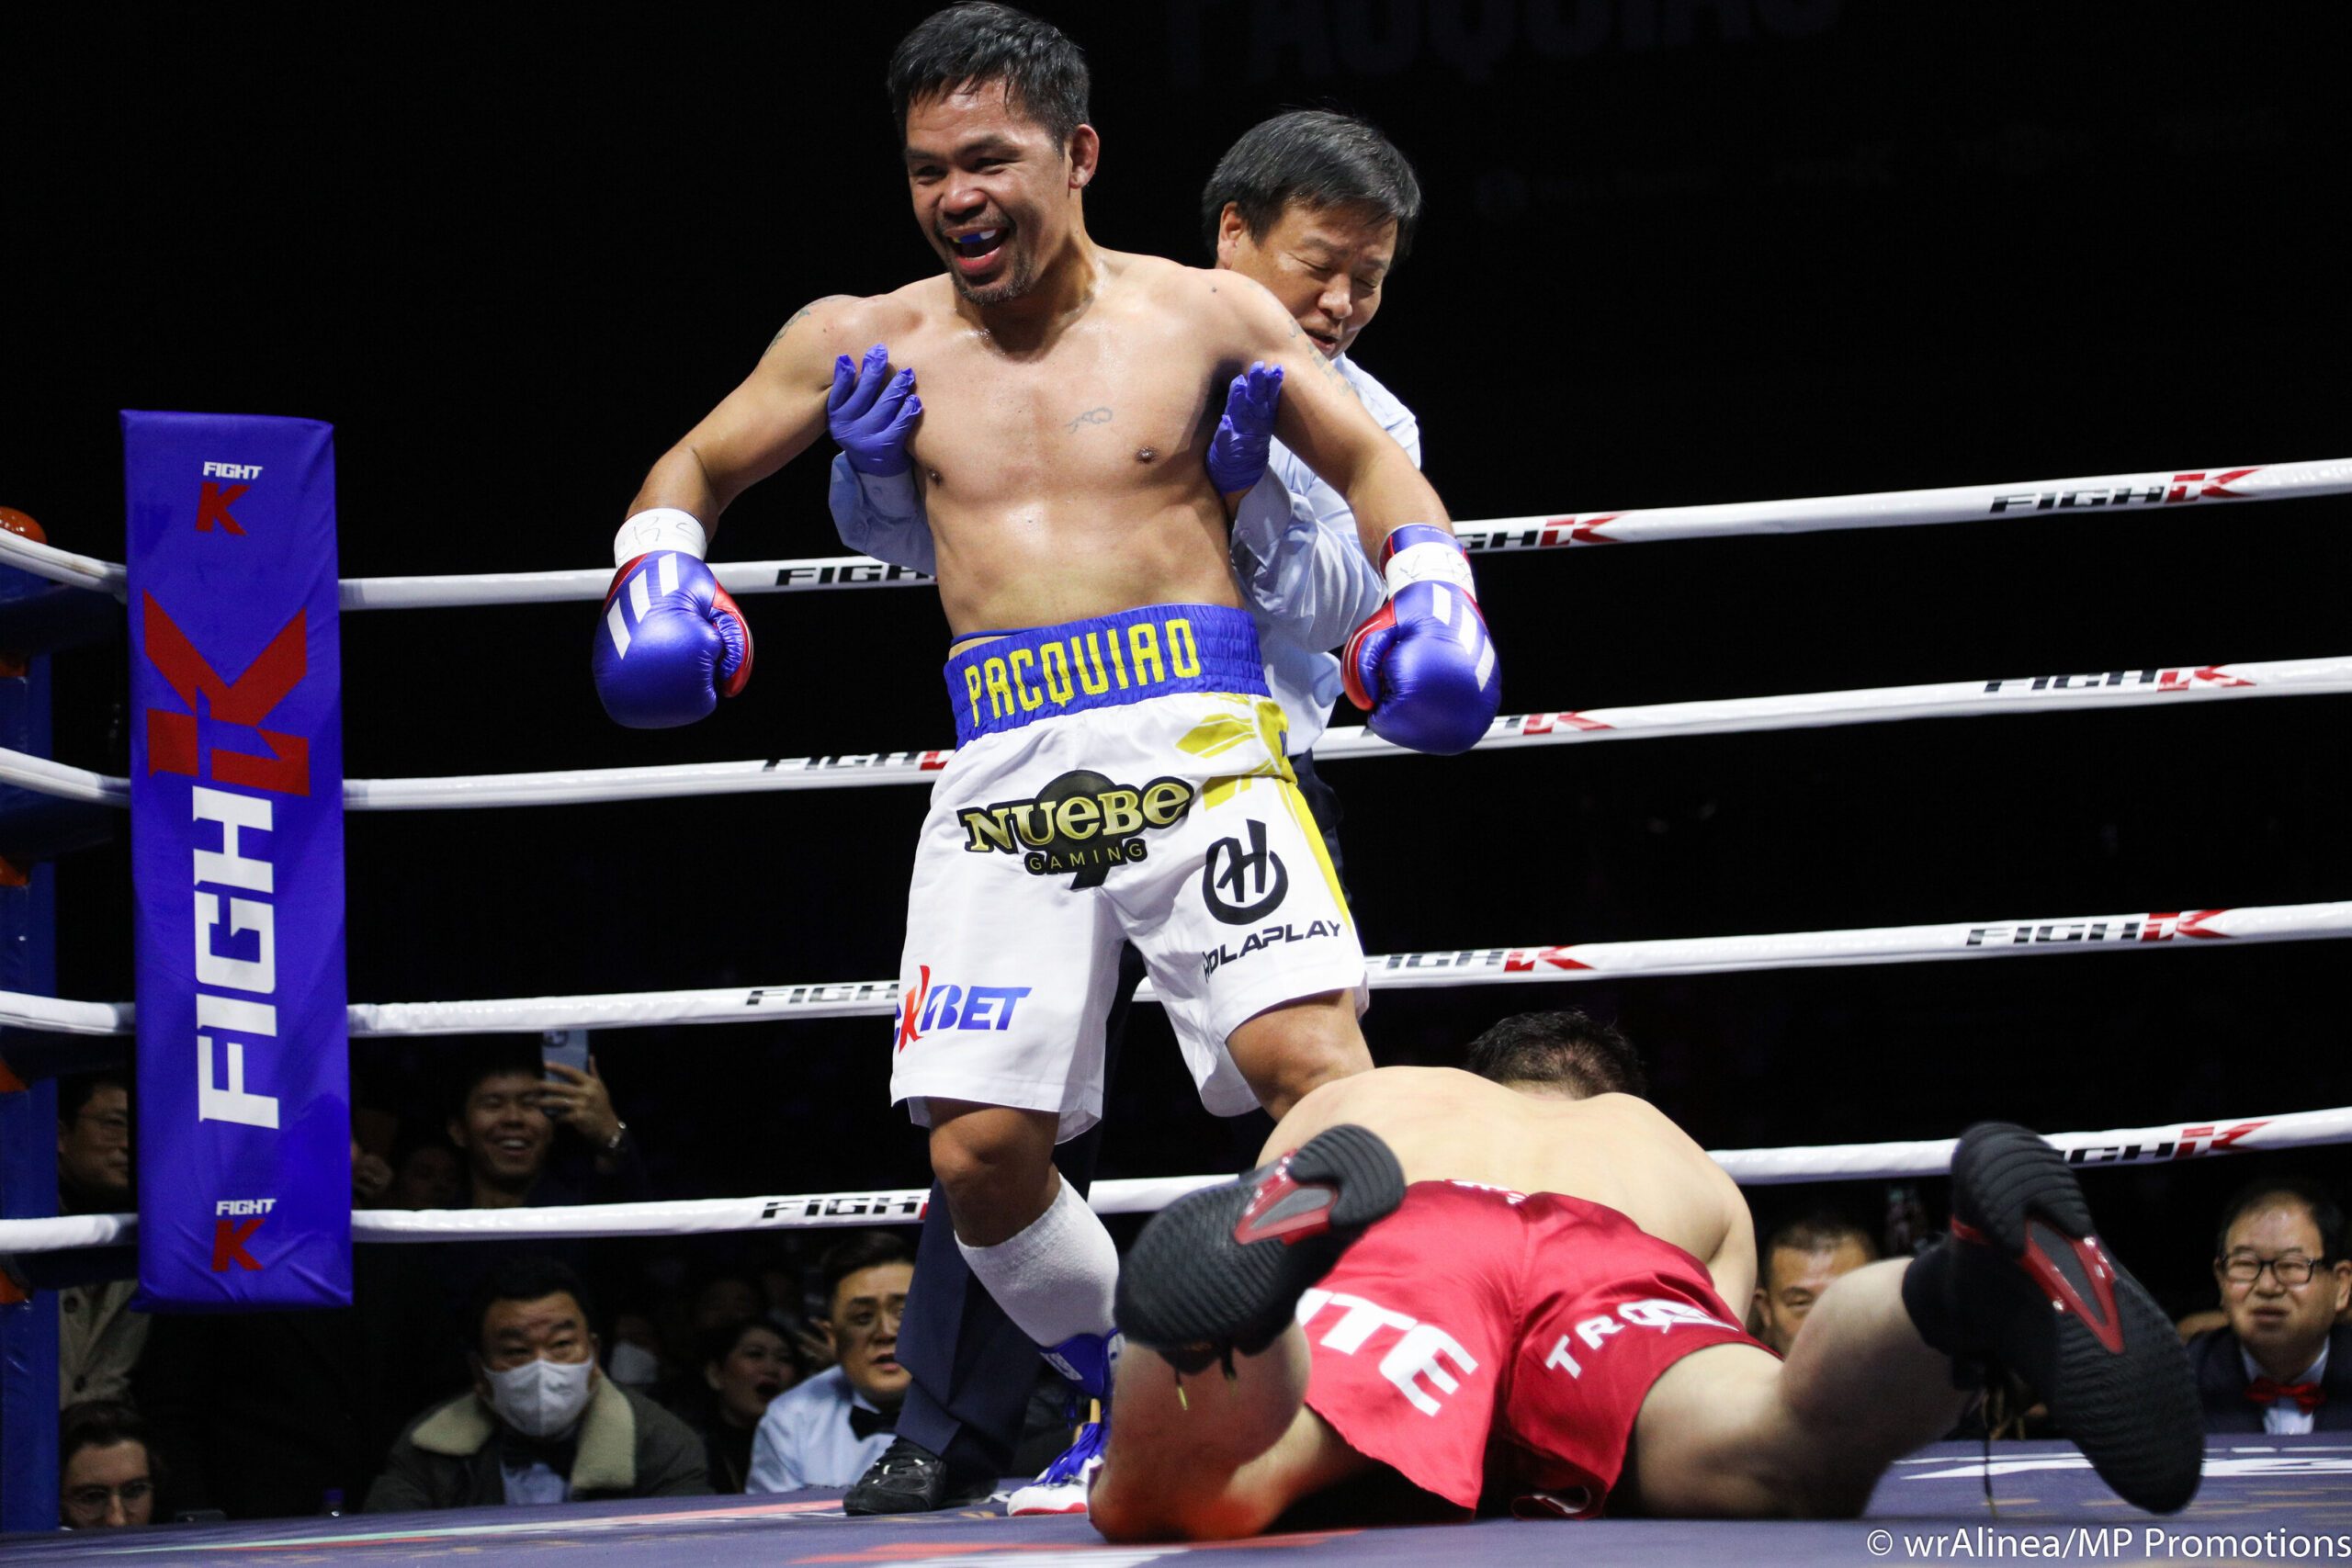 Manny Pacquiao toys with DK Yoo in dominant exhibition win